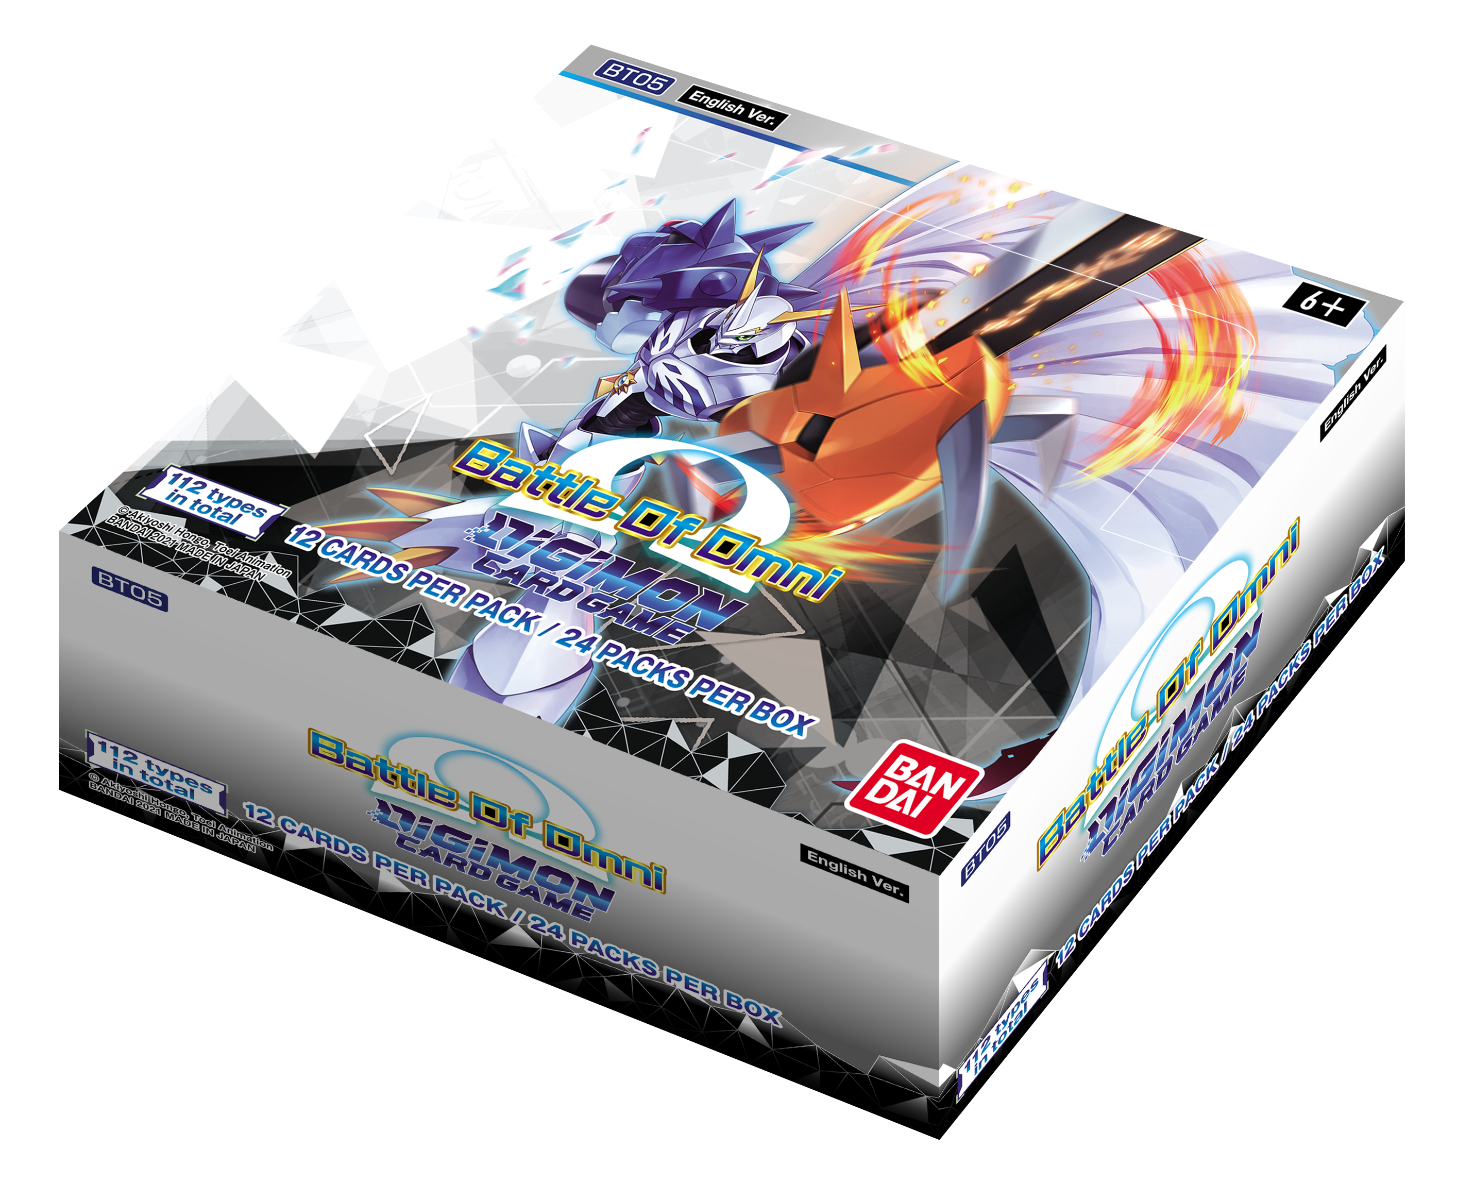 Digimon Card Game Series 5 - Battle of Omni Booster Box (BT5) *Sealed*